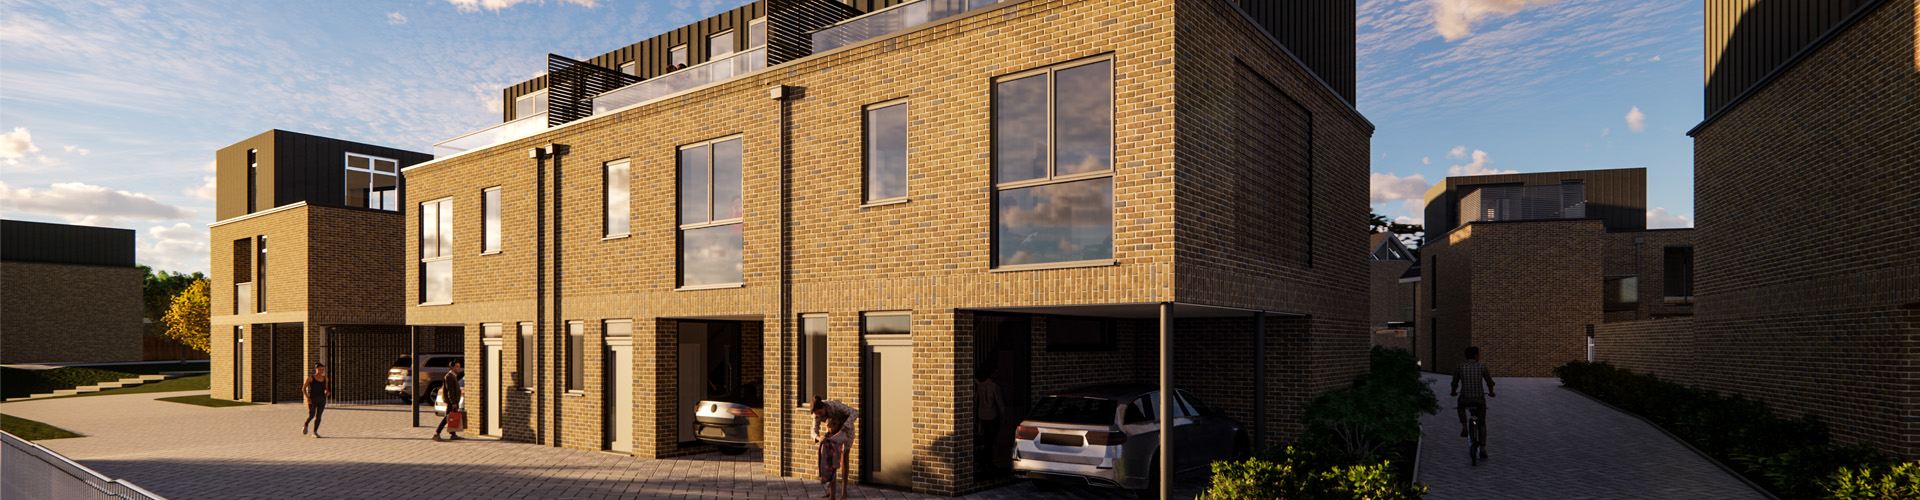 Quayside Homes Combines Architectural Excellence with Aspirational Design